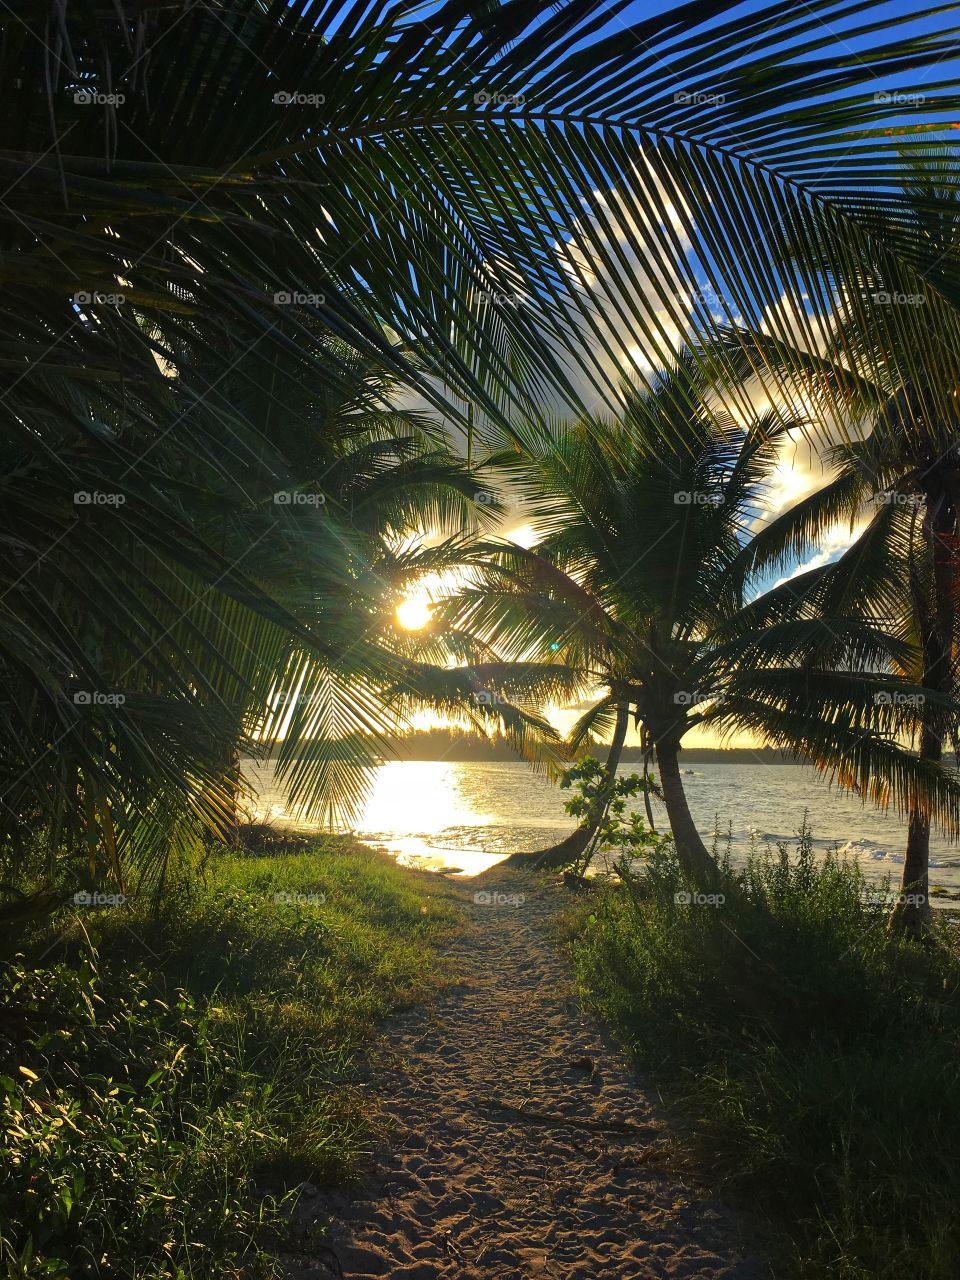 A road between palms to the sunset